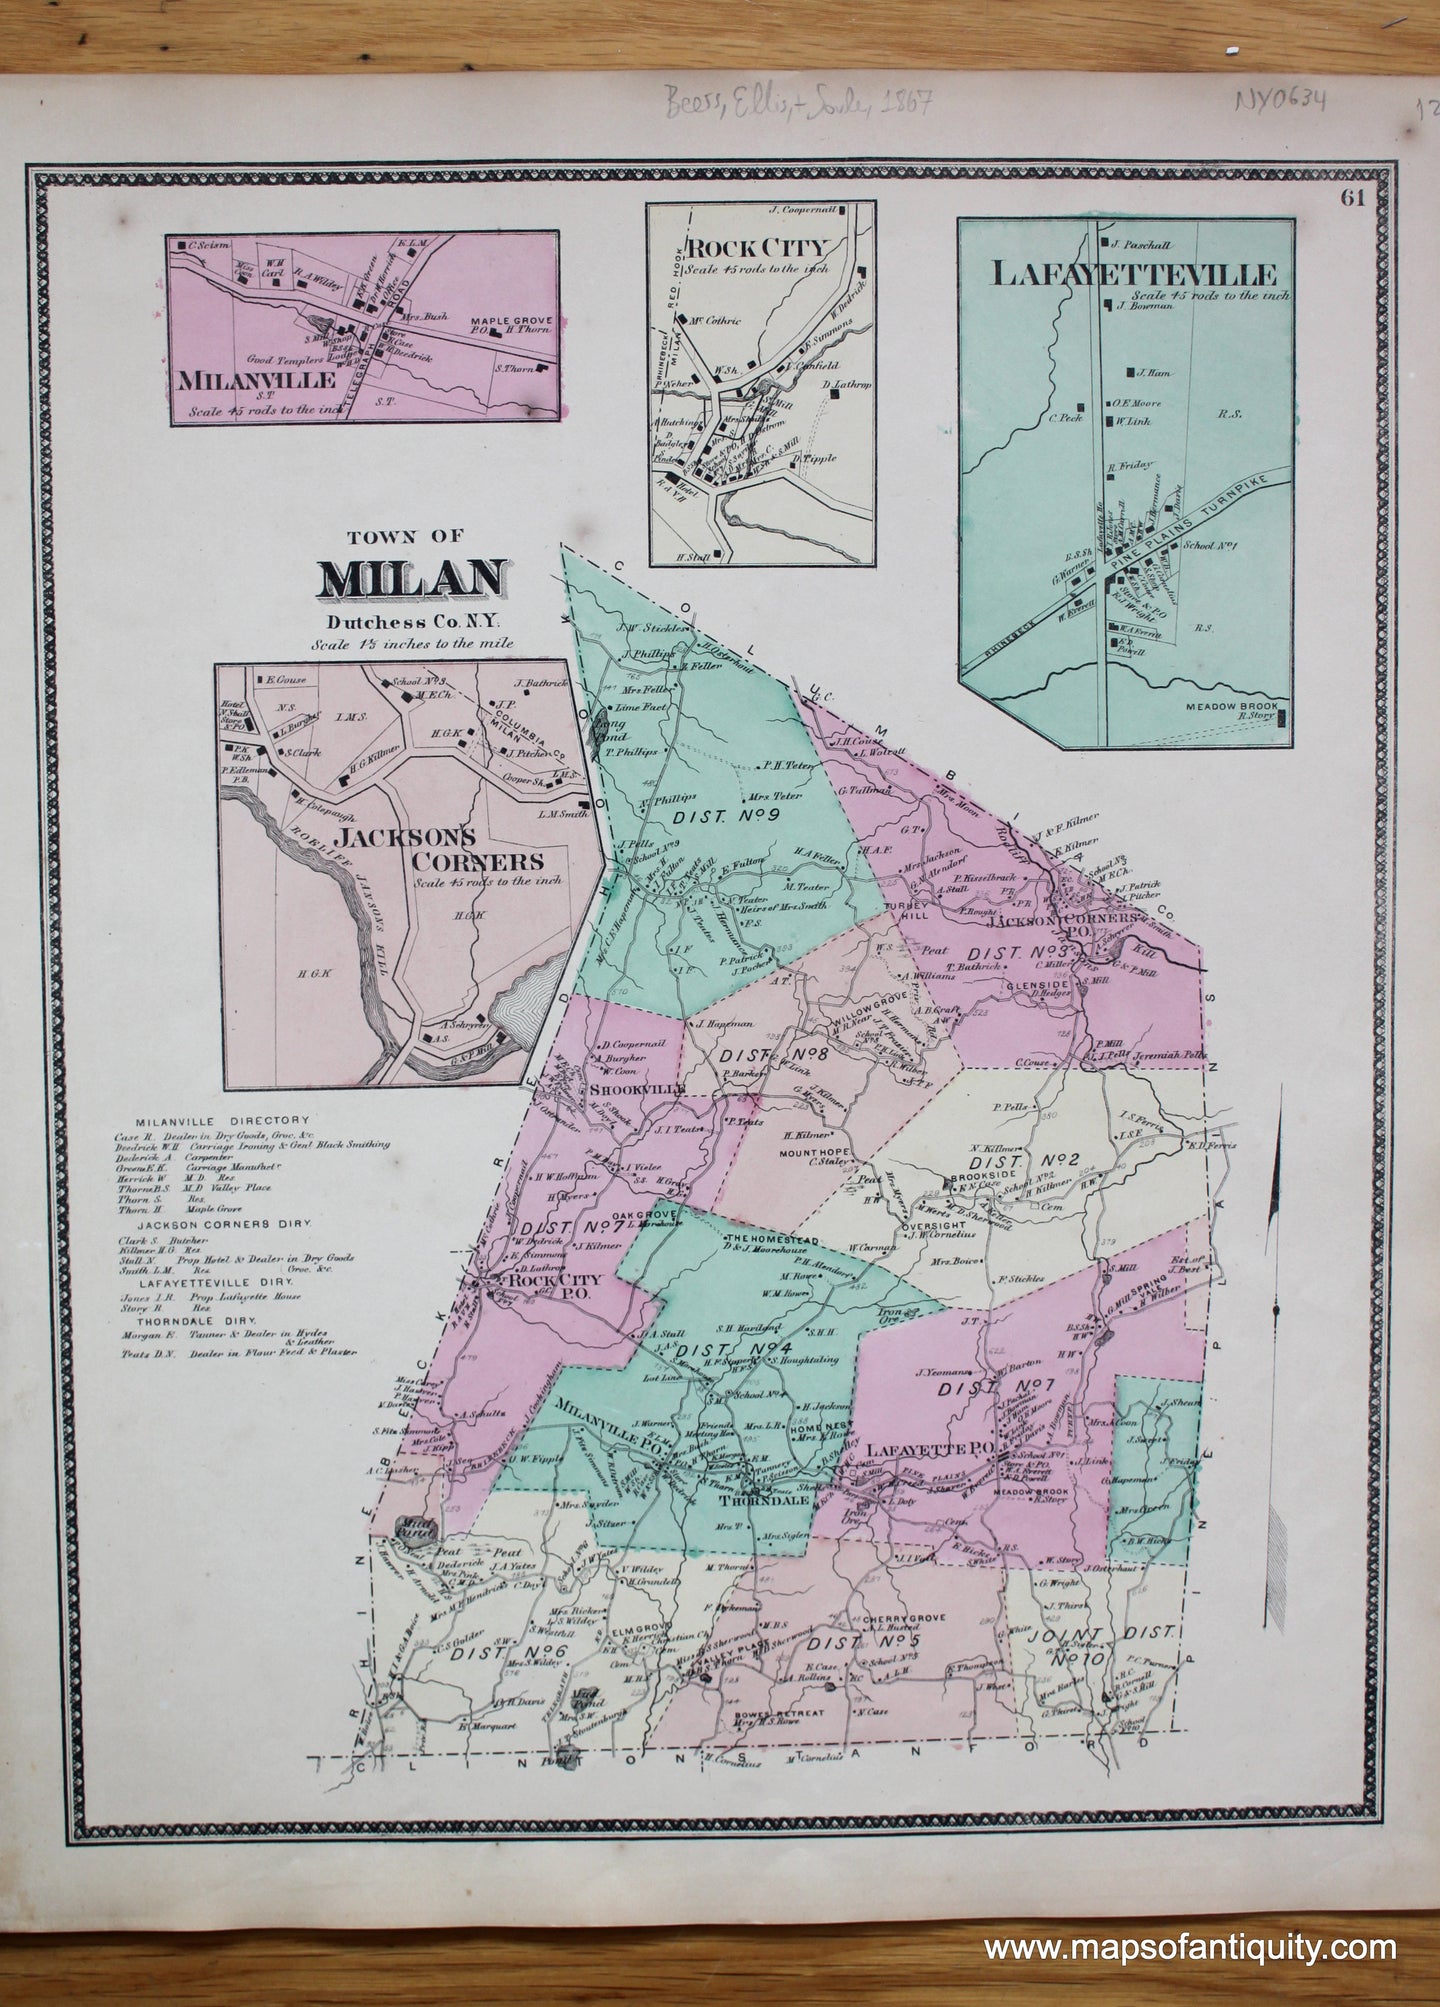 Antique-Hand-Colored-Map-Town-of-Milan-(NY)-United-States-New-York-1867-Beers-Ellis-and-Soule-Maps-Of-Antiquity